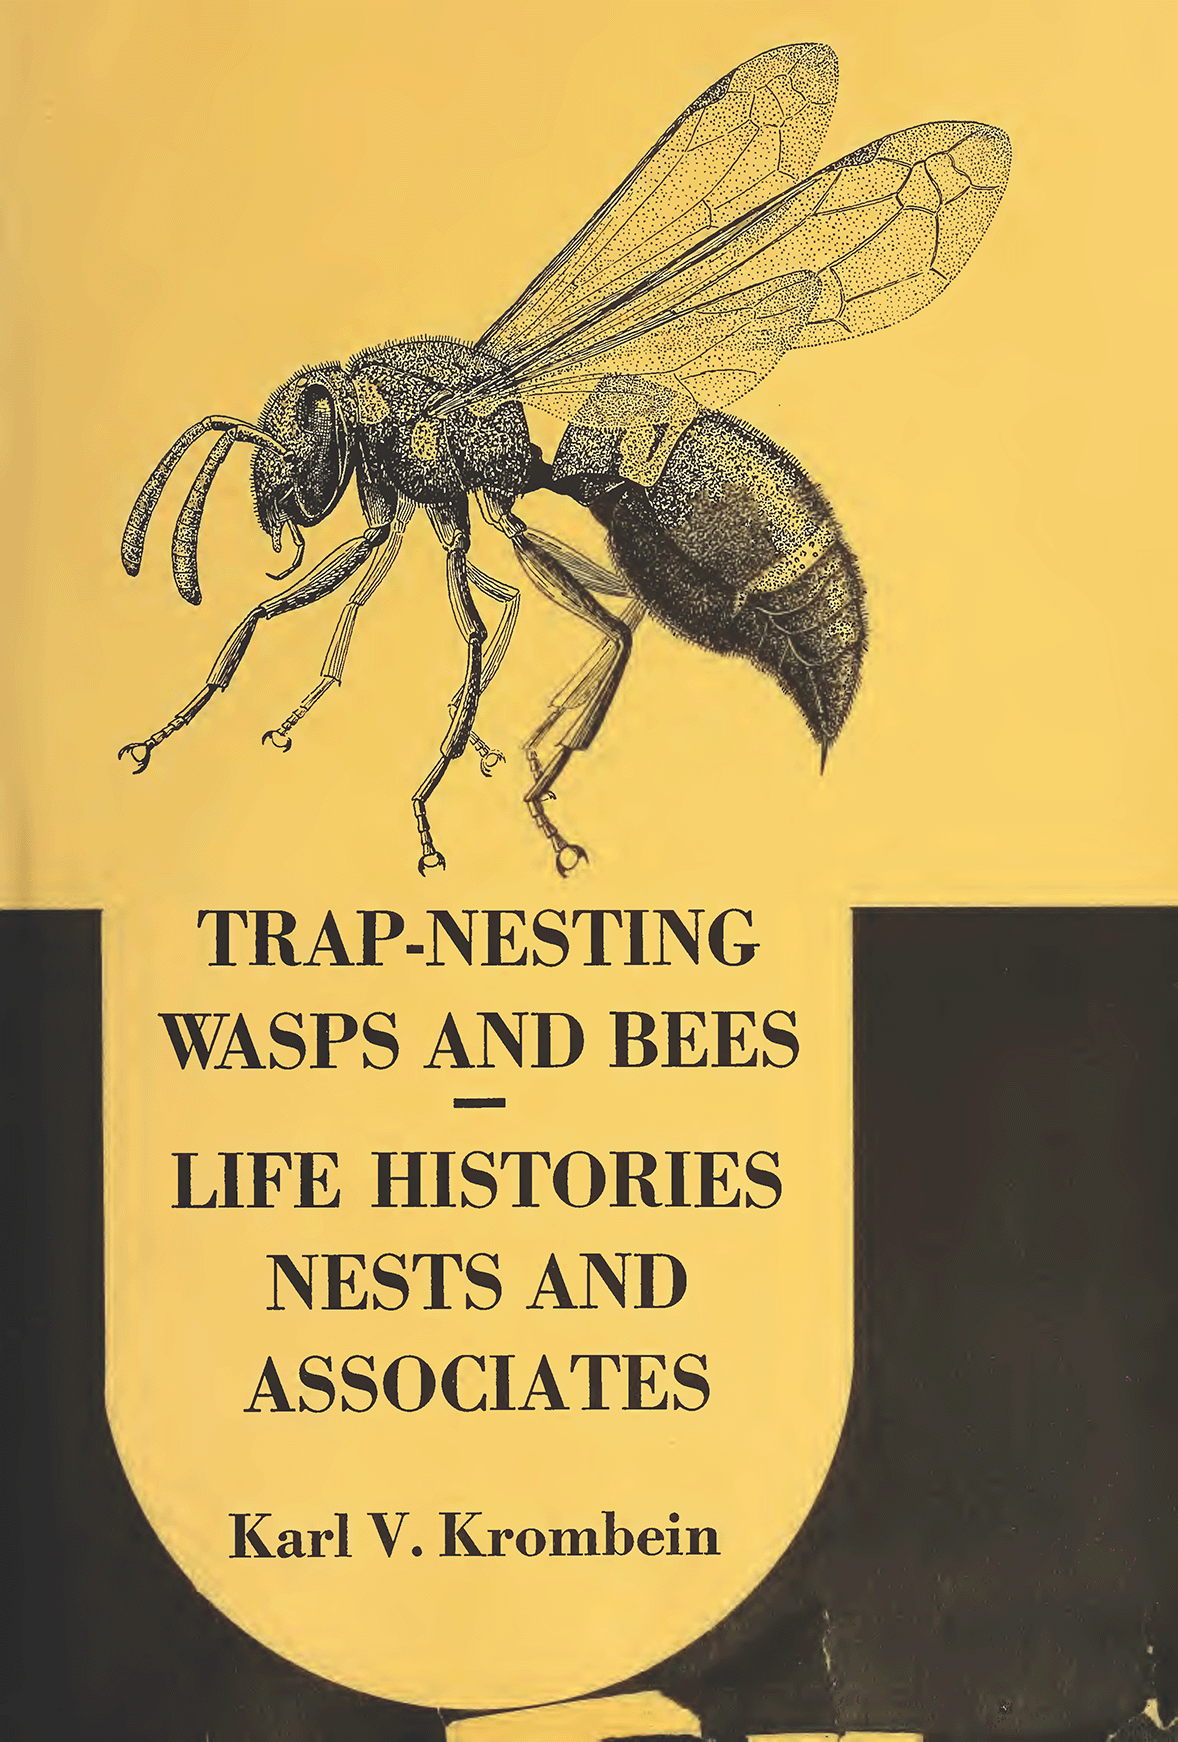 The front cover of Karl Krombein's book Trap-Nesting Wasps and Bees